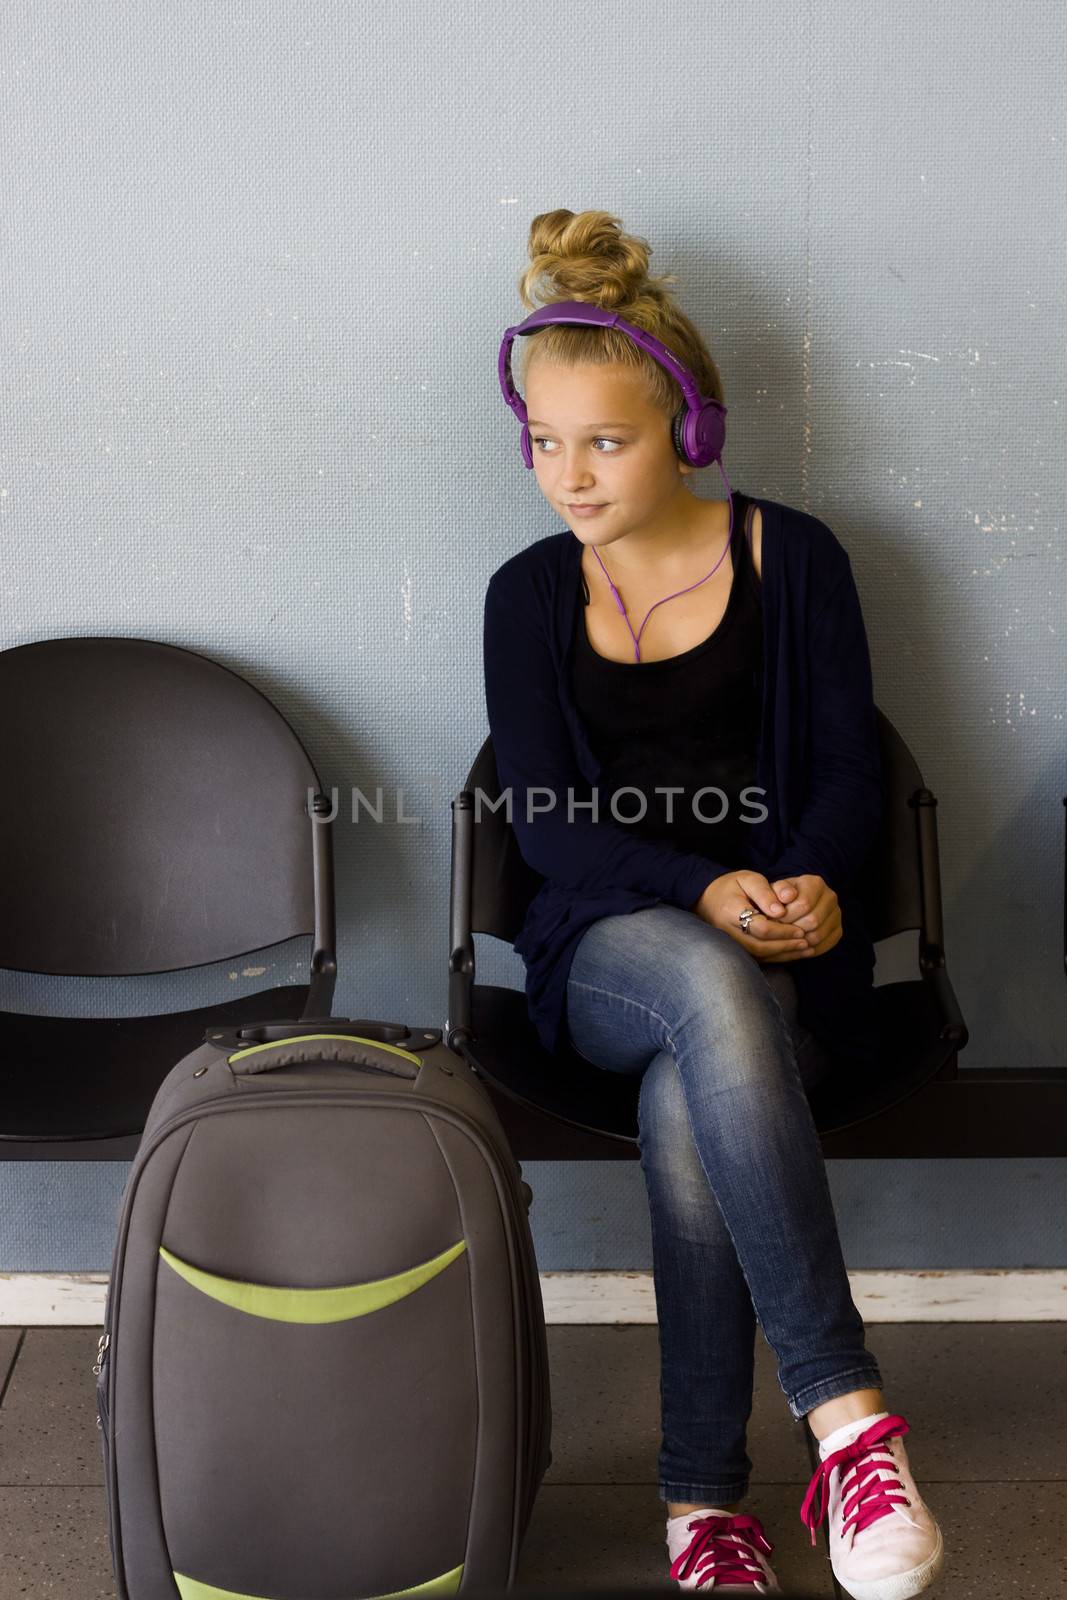 Girl with headphones waiting to travel by annems